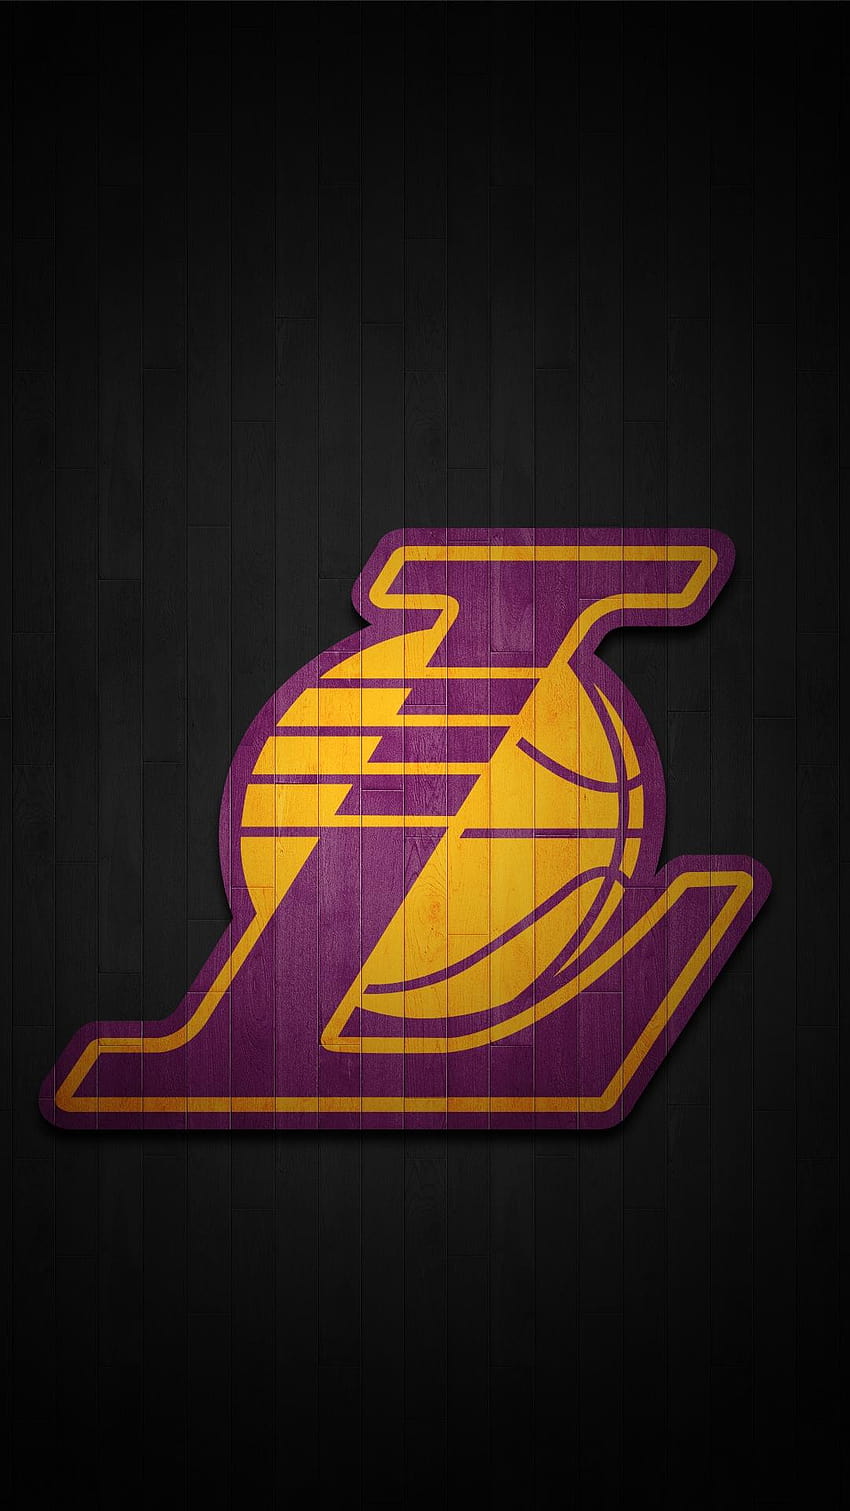 Los Angeles Lakers High Definition Wallpaper 33523 - Baltana